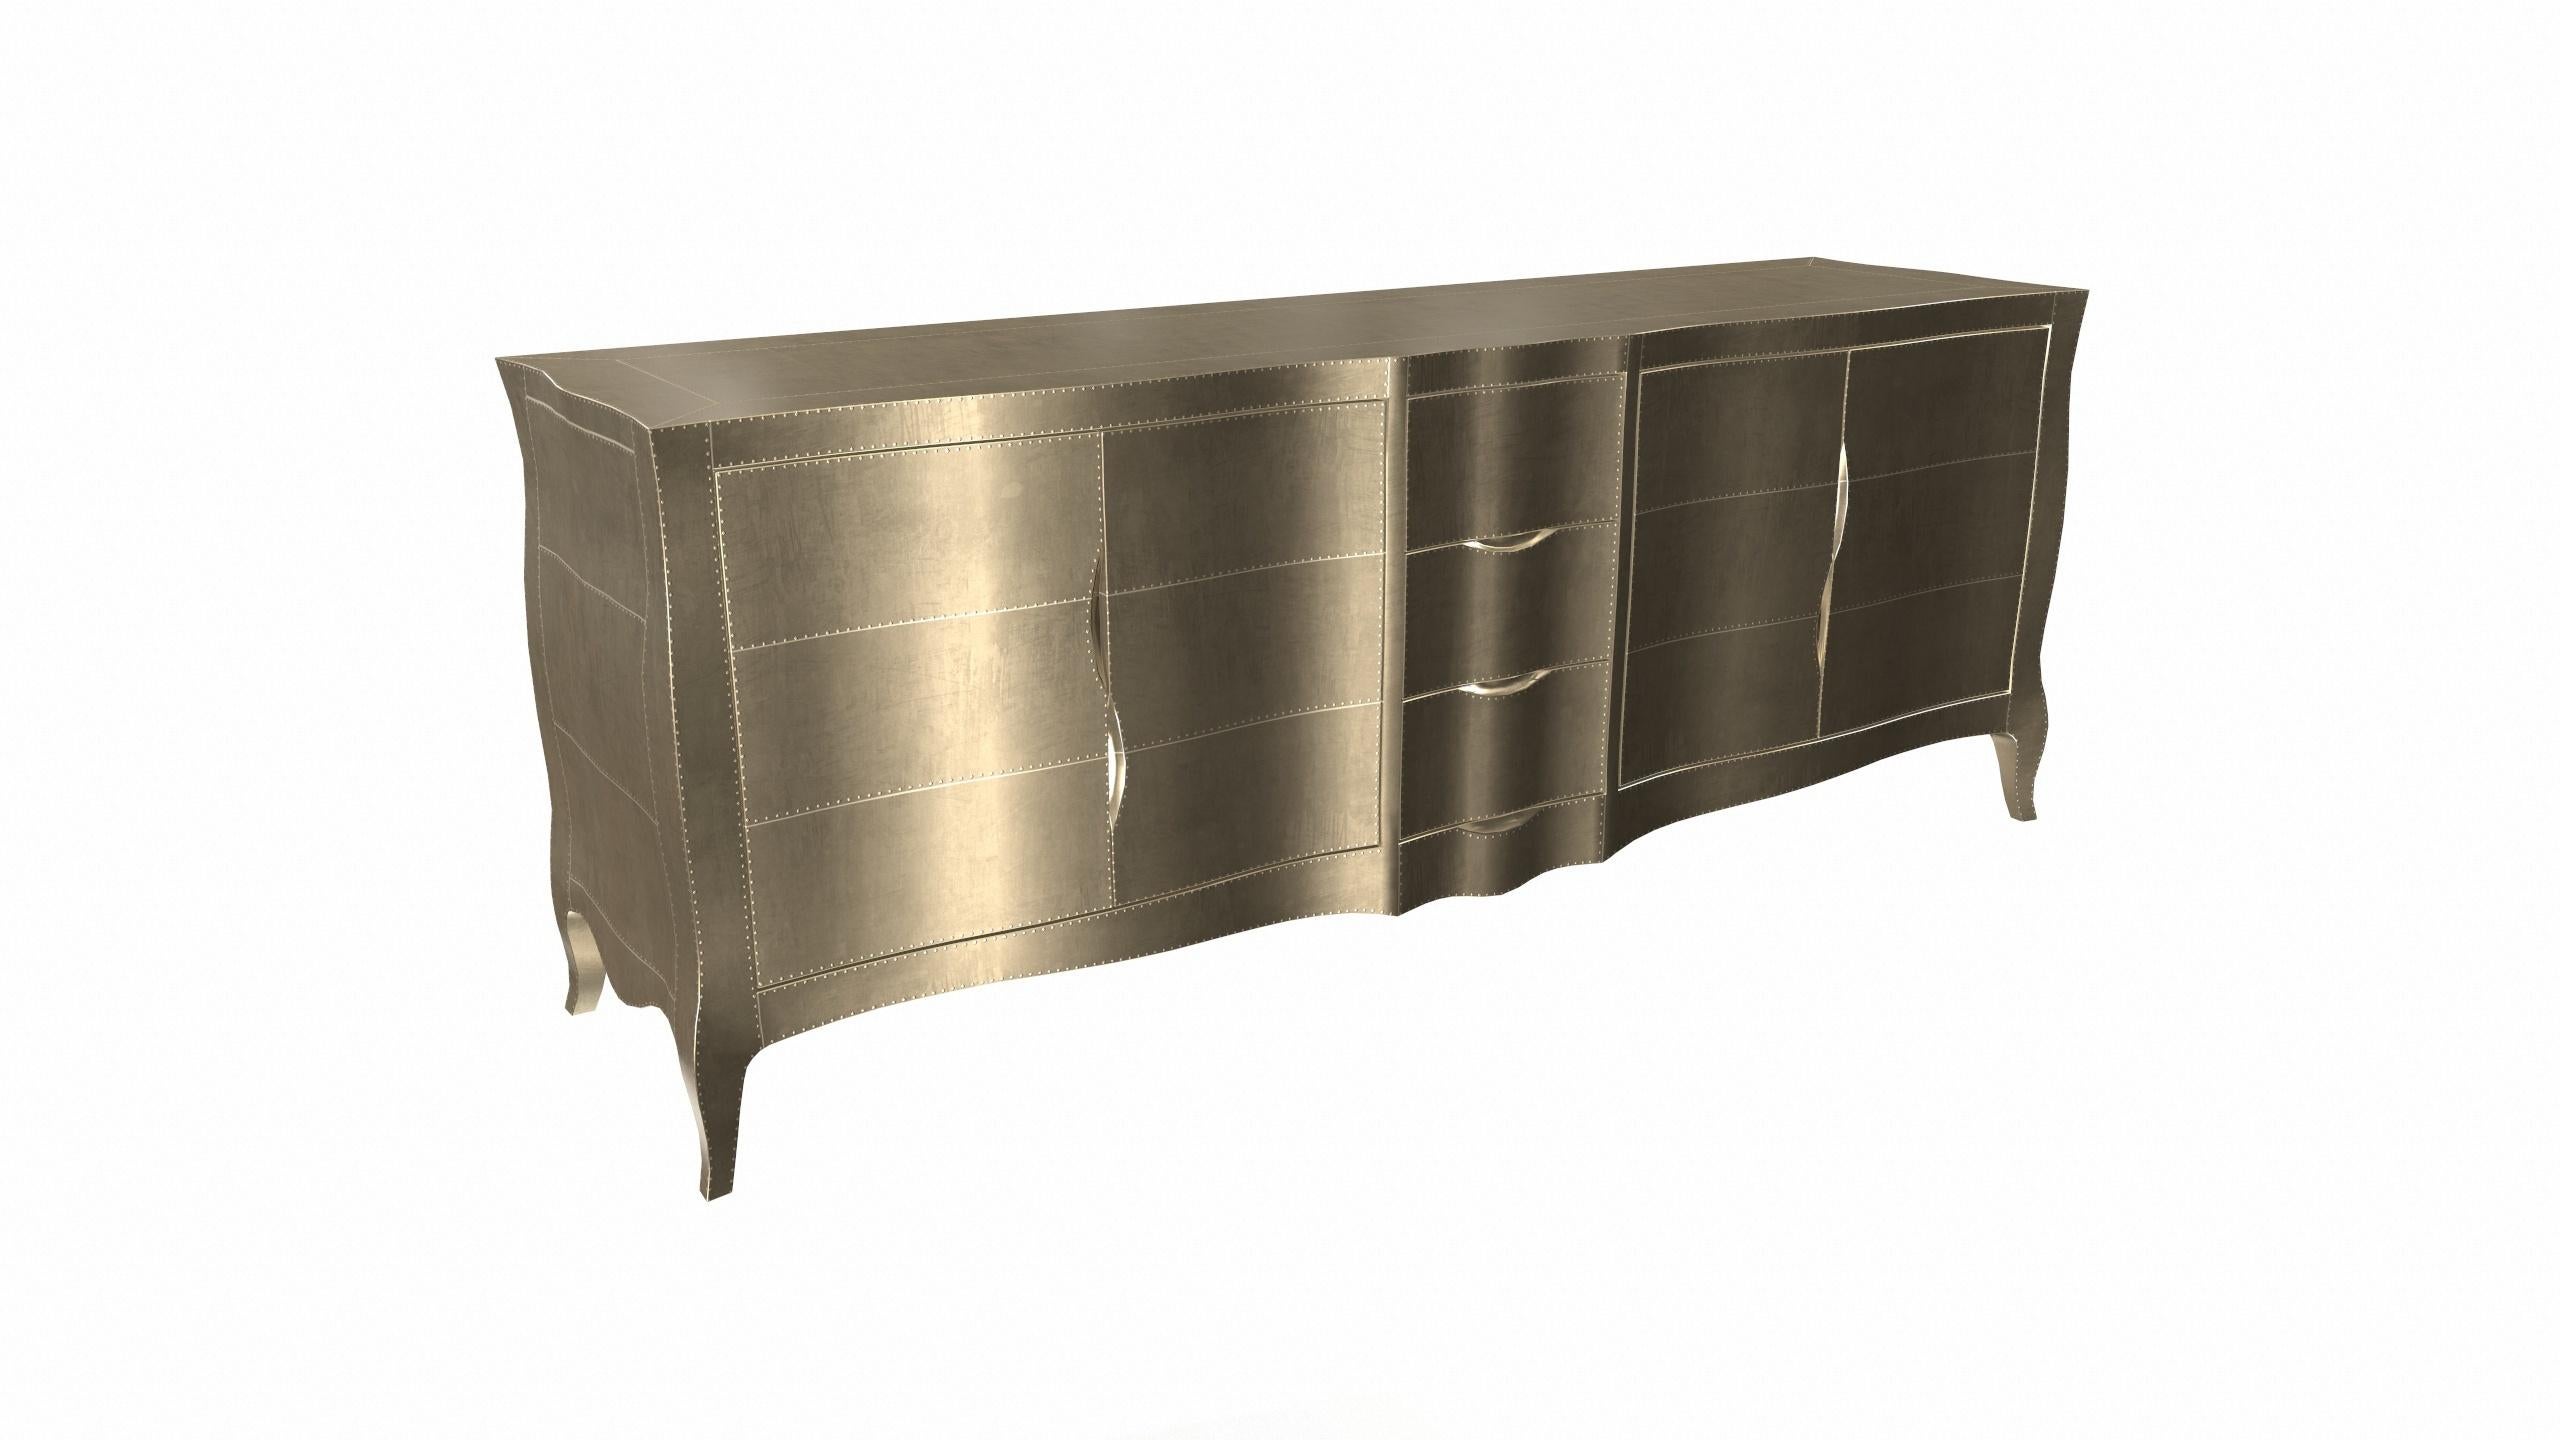 Contemporary Louise Credenza Art Deco Cabinets in Smooth Brass by Paul Mathieu for S Odegard For Sale